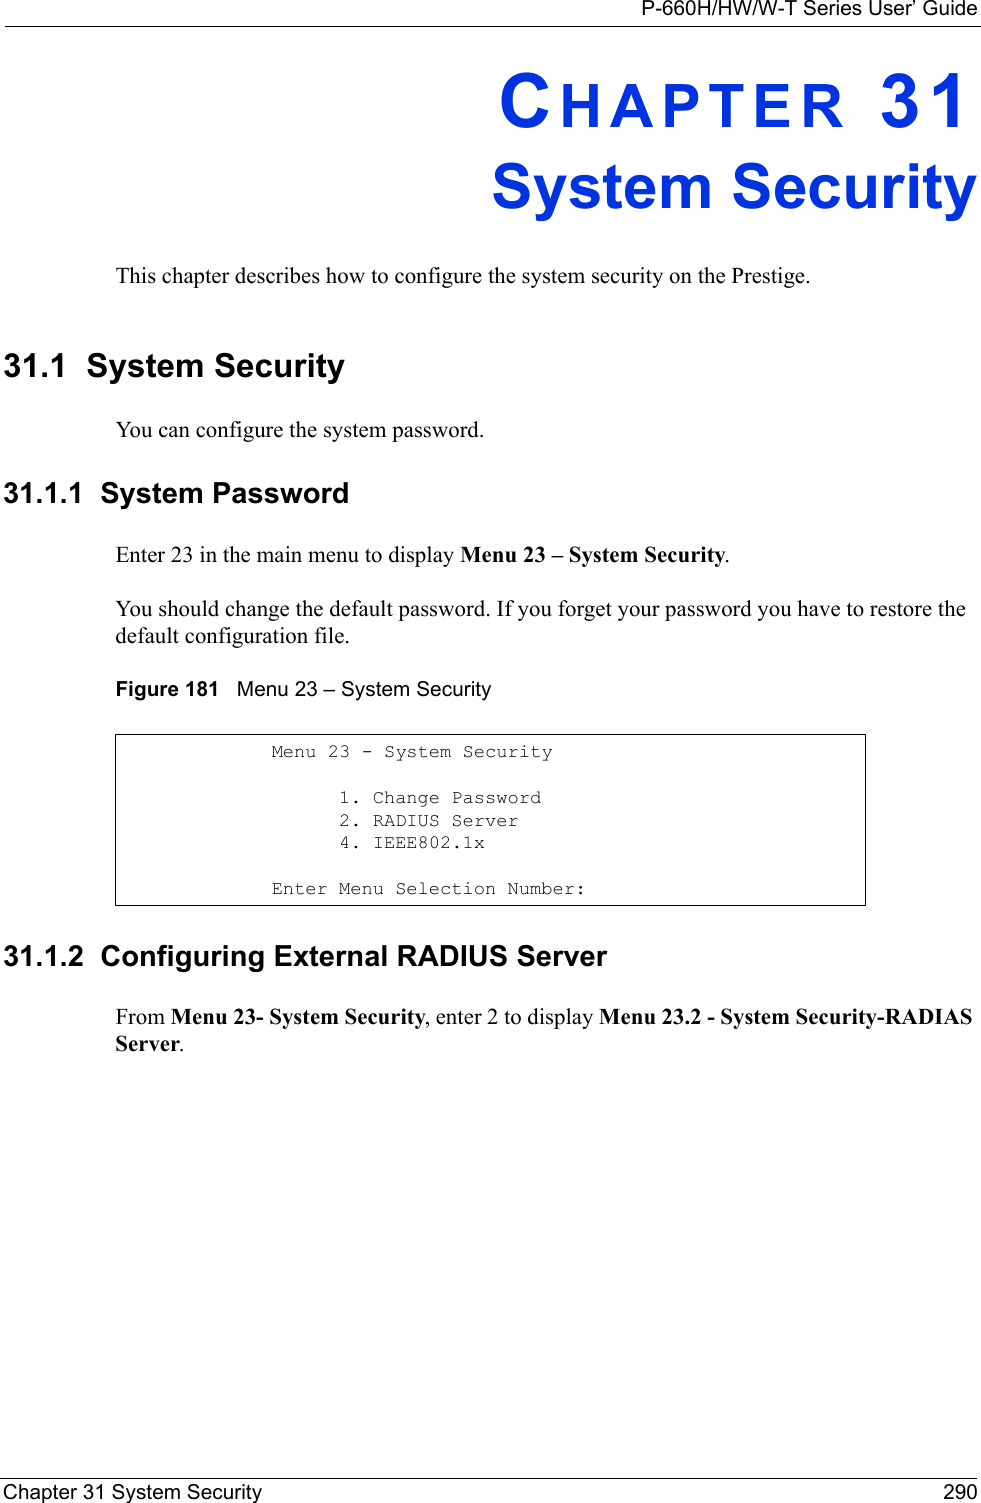 P-660H/HW/W-T Series User’ GuideChapter 31 System Security 290CHAPTER 31System SecurityThis chapter describes how to configure the system security on the Prestige.31.1  System SecurityYou can configure the system password.31.1.1  System PasswordEnter 23 in the main menu to display Menu 23 – System Security.You should change the default password. If you forget your password you have to restore the default configuration file. Figure 181   Menu 23 – System Security31.1.2  Configuring External RADIUS ServerFrom Menu 23- System Security, enter 2 to display Menu 23.2 - System Security-RADIAS Server.Menu 23 - System Security      1. Change Password      2. RADIUS Server      4. IEEE802.1xEnter Menu Selection Number: